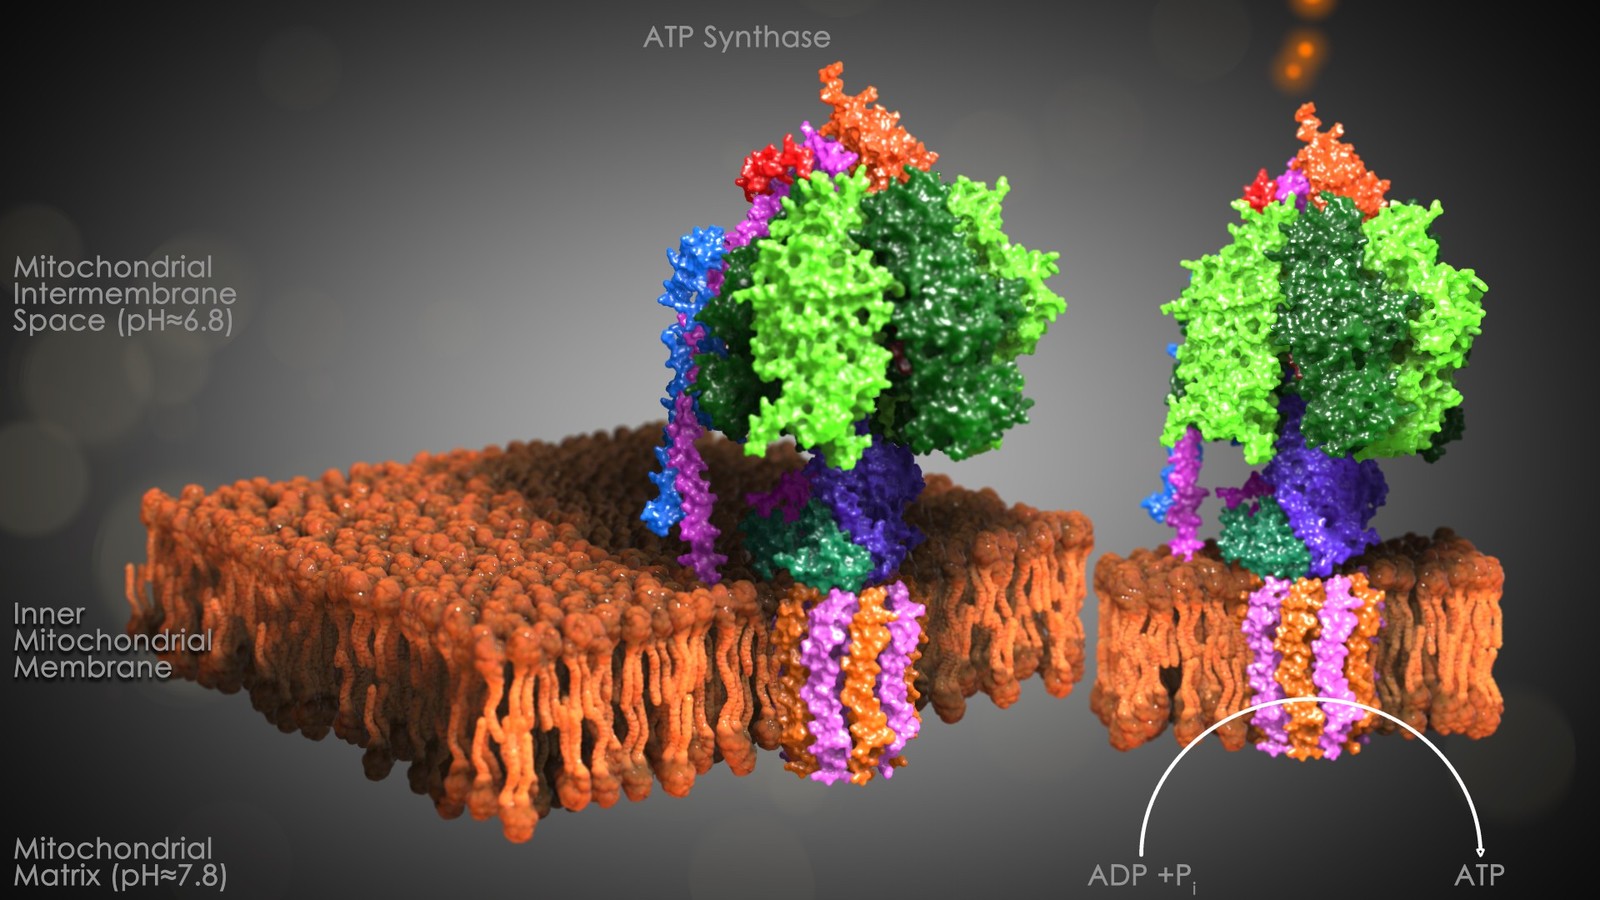 Mitochondrial ATP Synthase